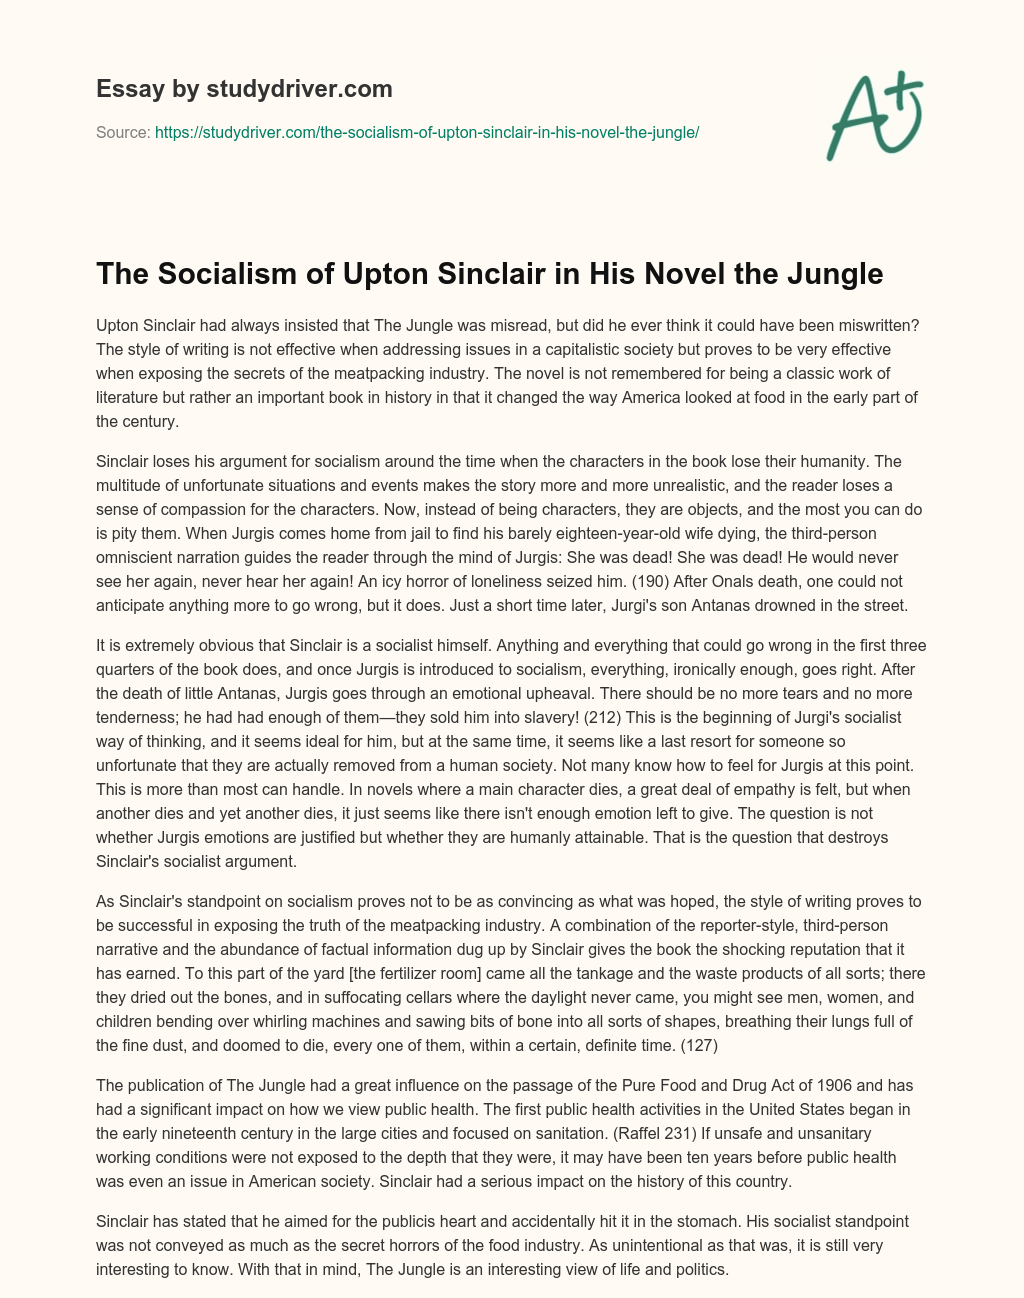 The Socialism of Upton Sinclair in his Novel the Jungle essay